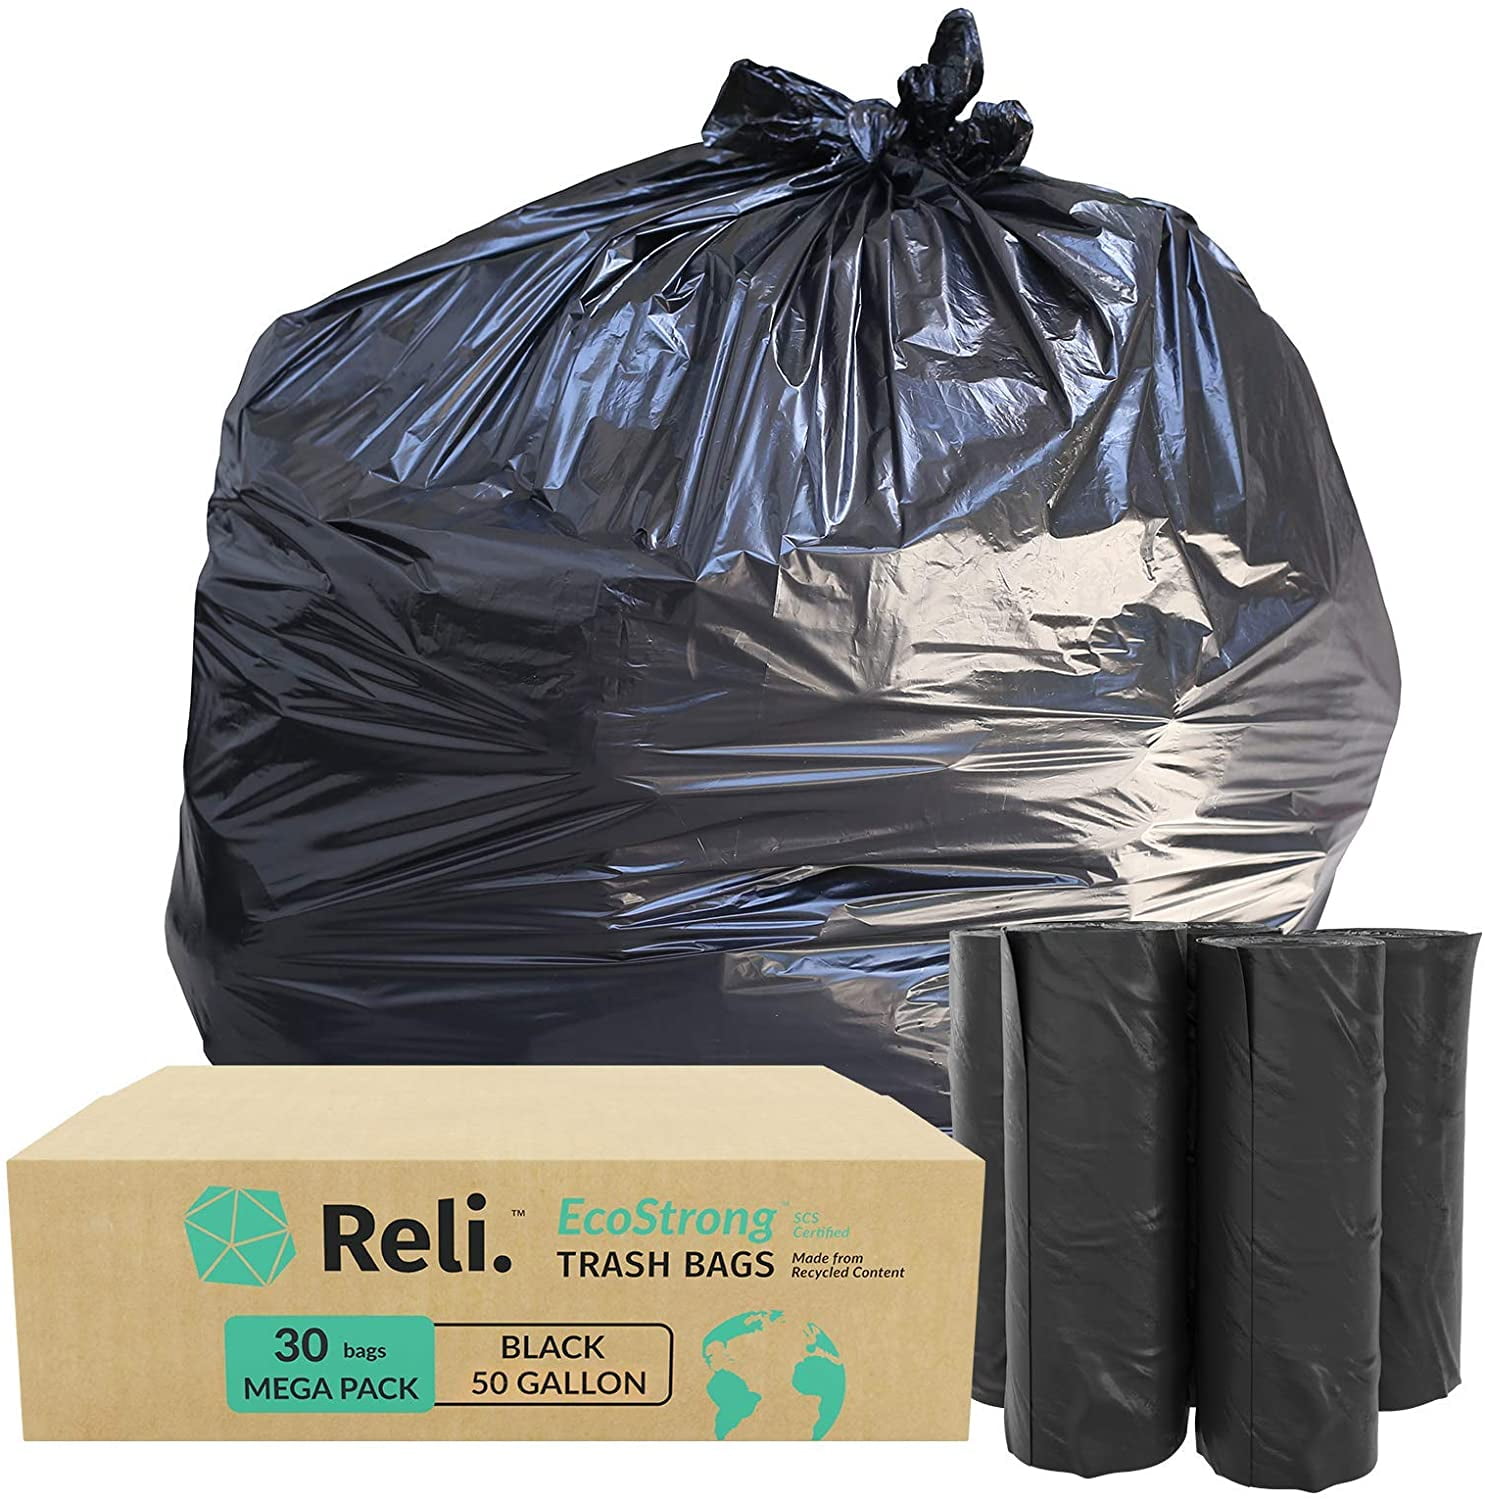 Reli. Eco-Friendly 50 Gallon Trash Bags (30 Bags) Recyclable 45 Gallon  Large Garbage Bags - Made of Recycled Material (Black) 